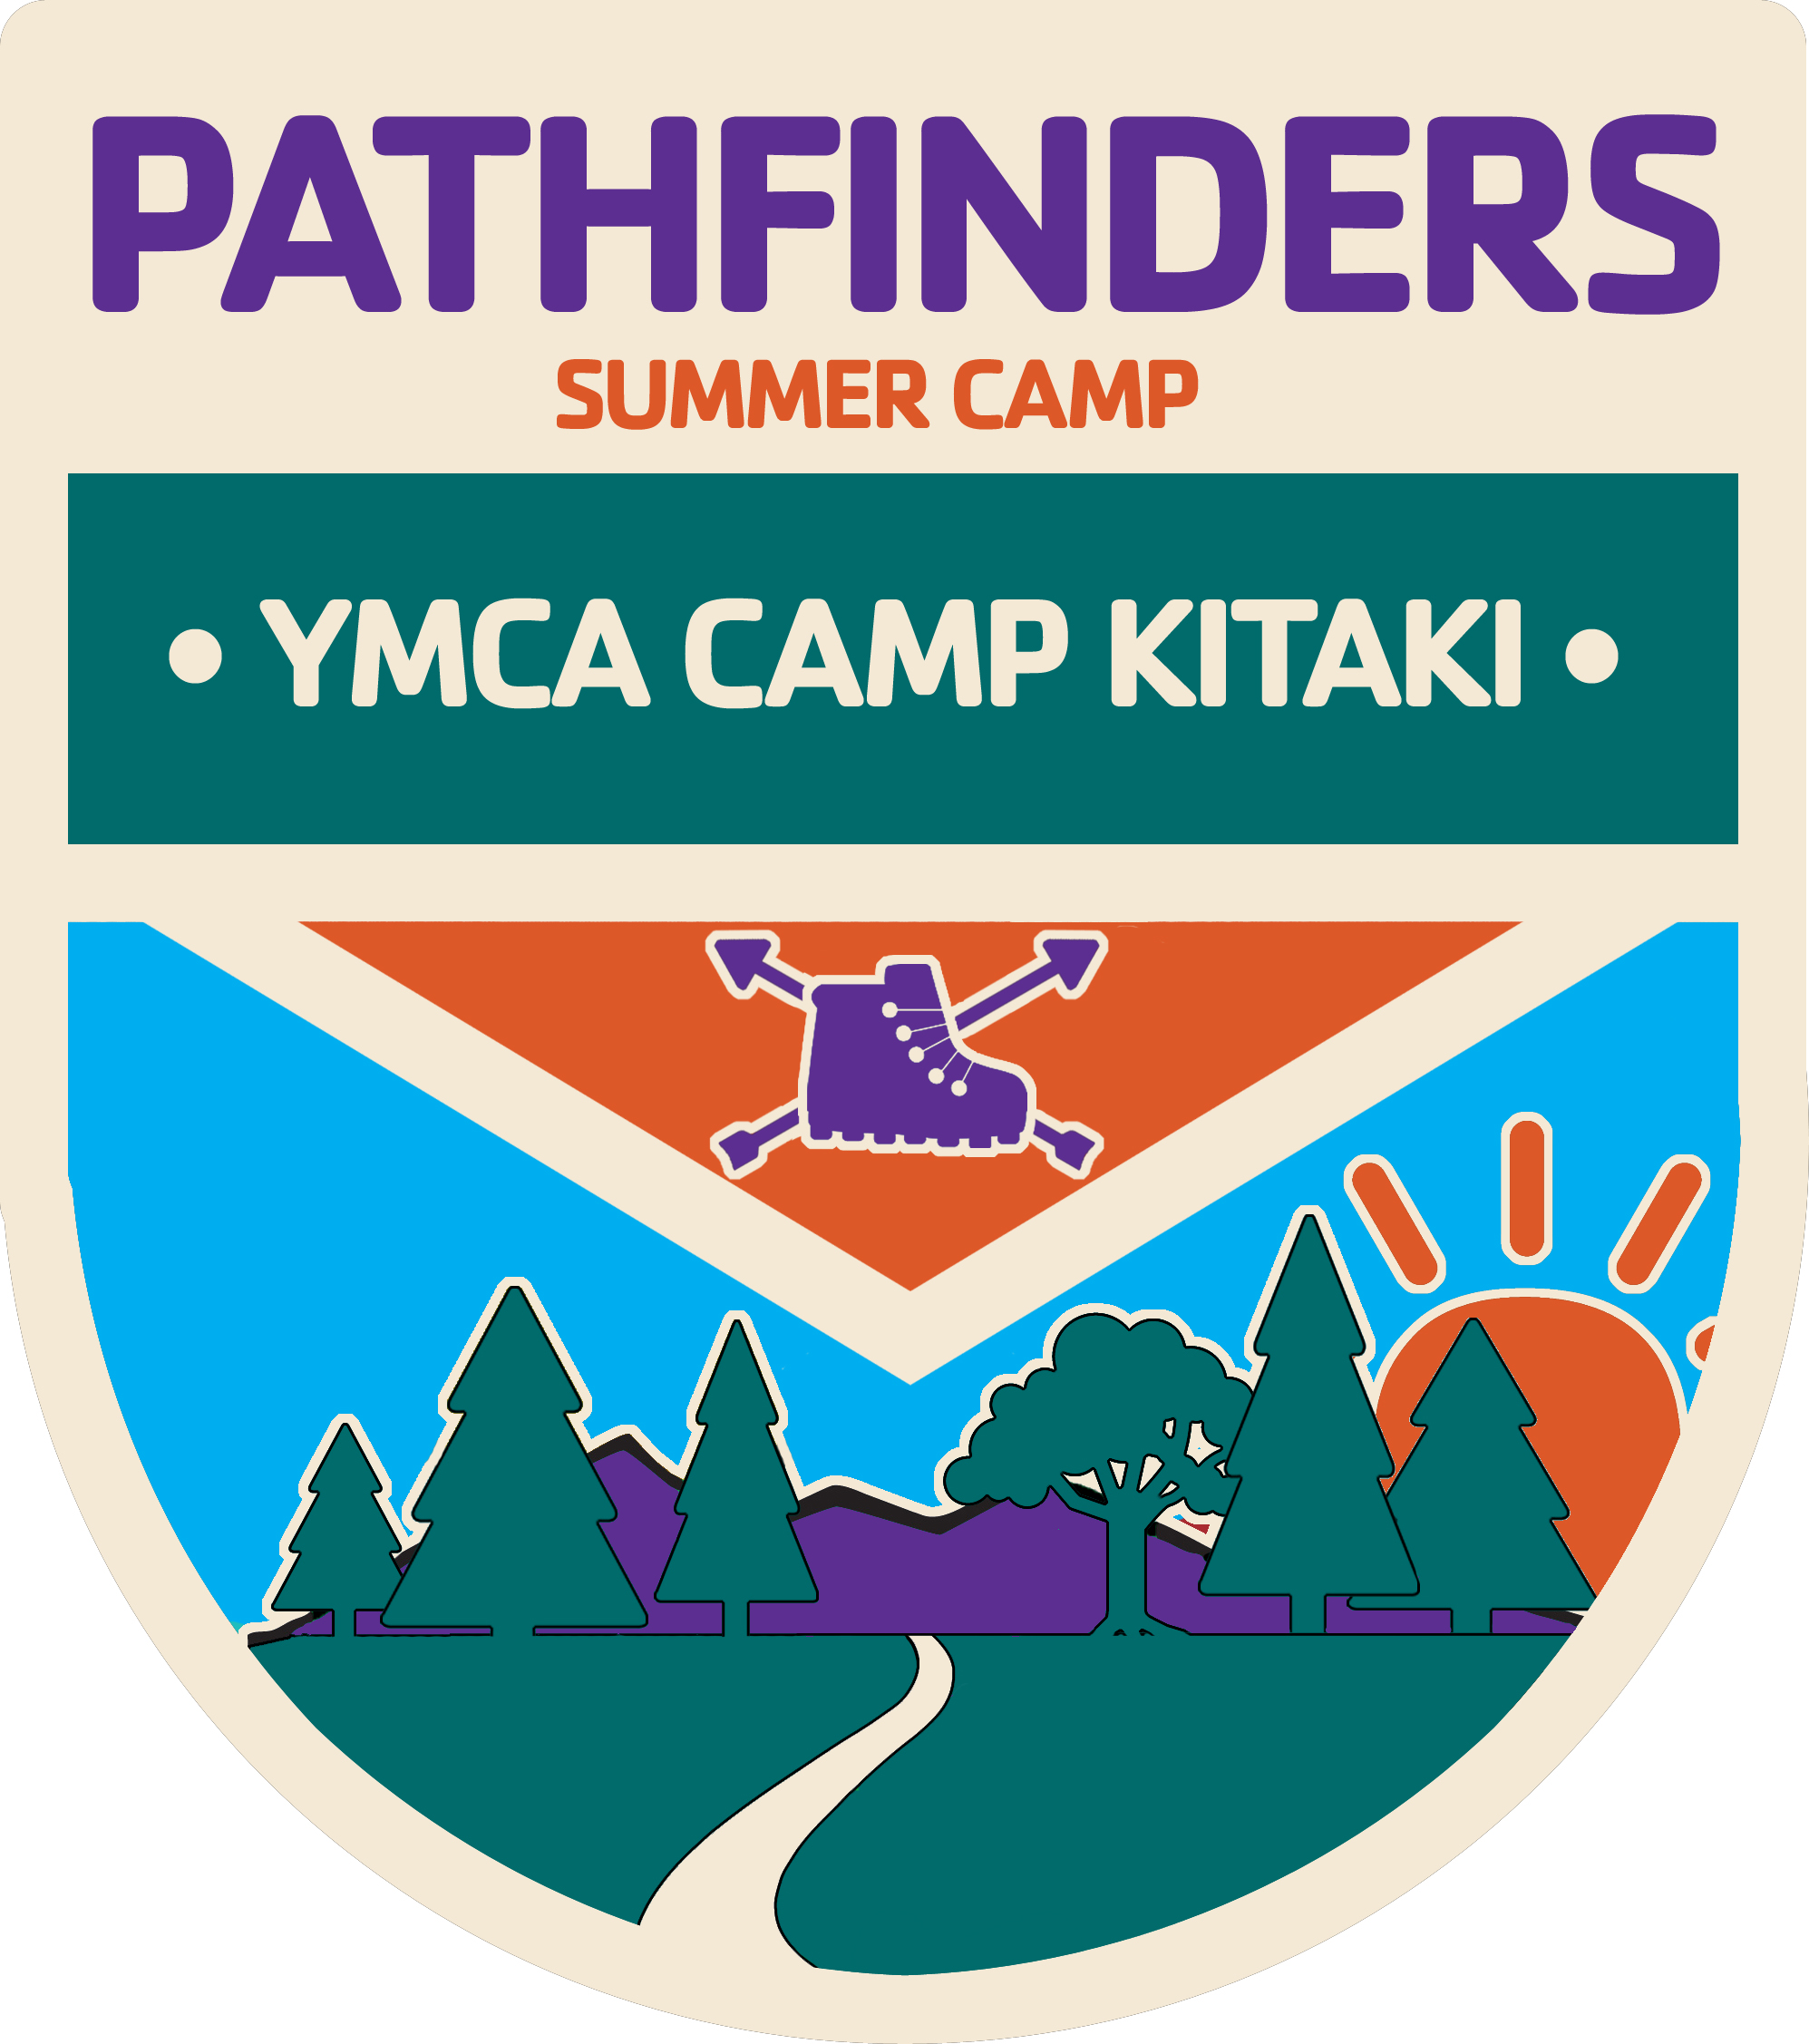 A badge for the Pathfinders camp